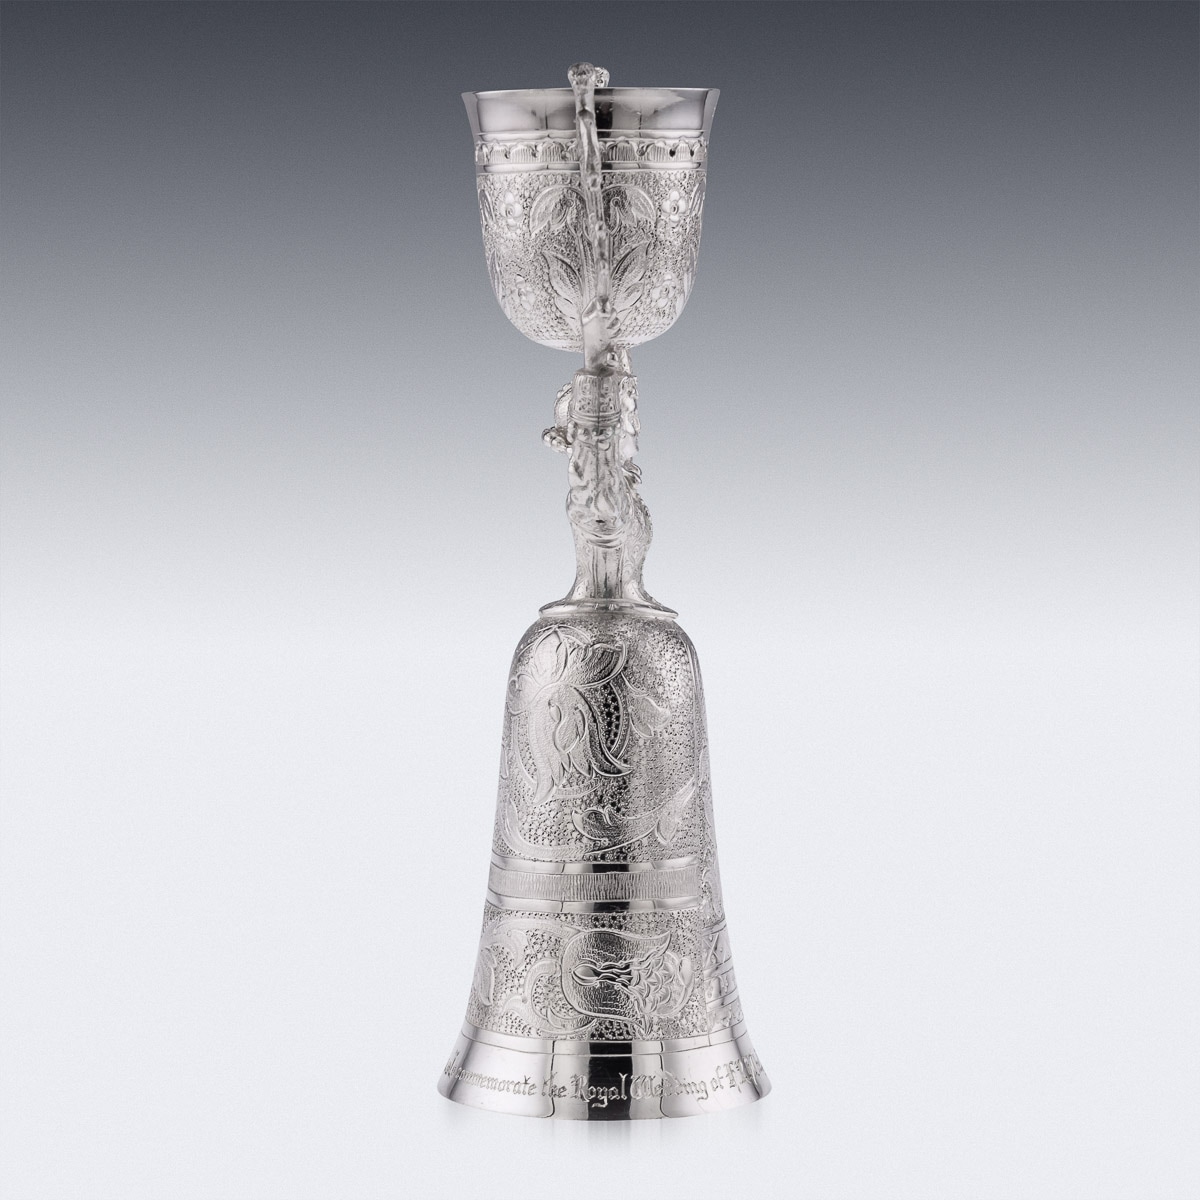 A ROYAL WEDDING SOLID STERLING SILVER NOVELTY WAGER CUP, LONDON, C. 1973 - Image 3 of 23